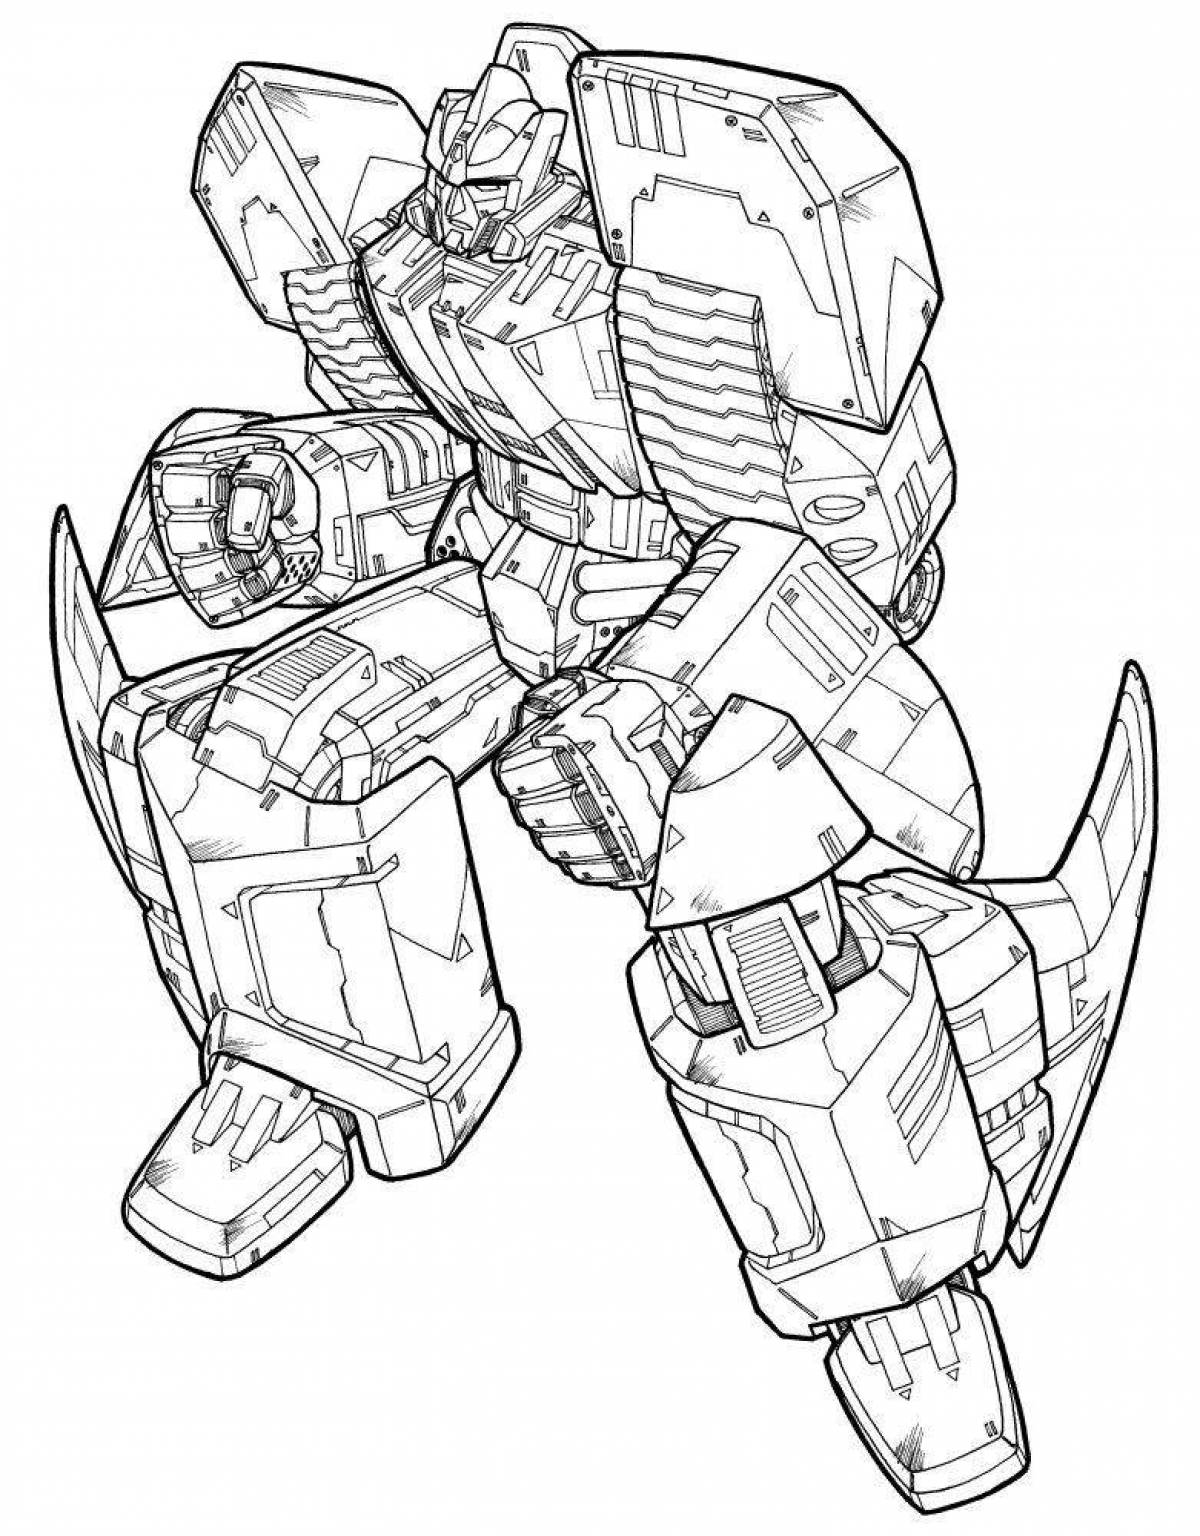 Majestic transformers coloring page